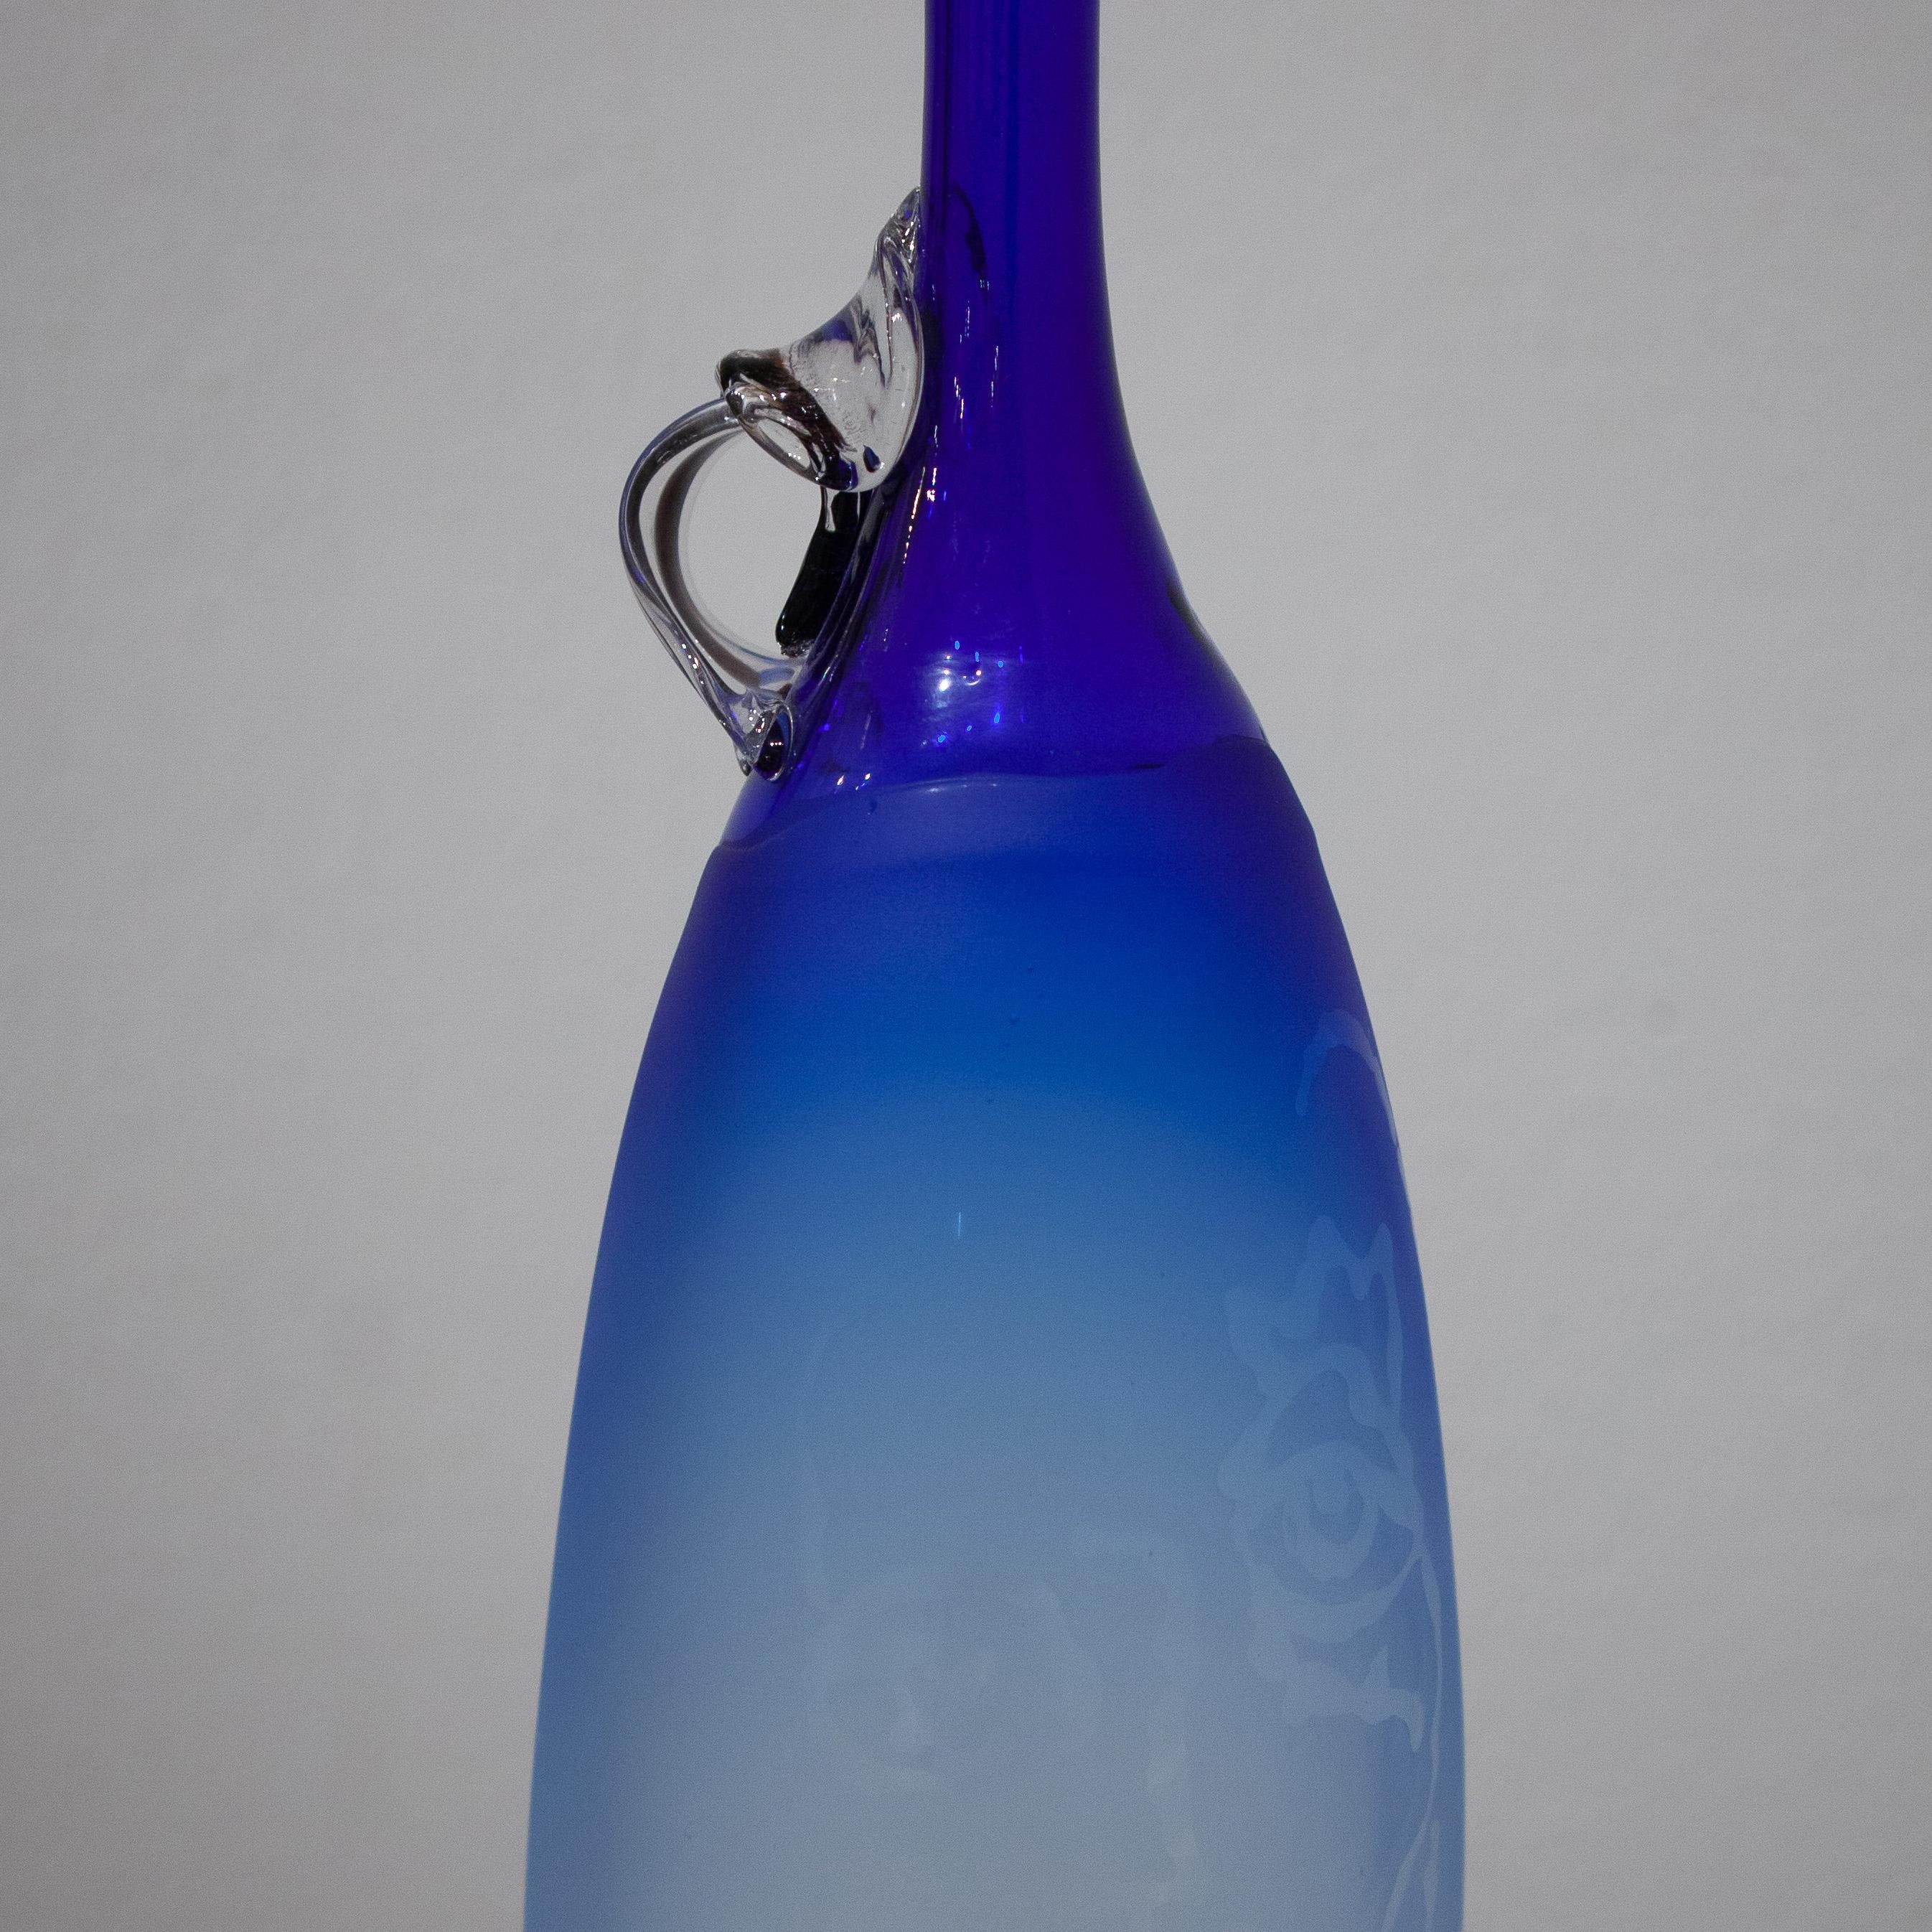 This vase was colored with Cobalt Glass. This technical form was then sandblasted with Robert G. Burch’s drawing of his muse. The drawings really pop with sunlight.
